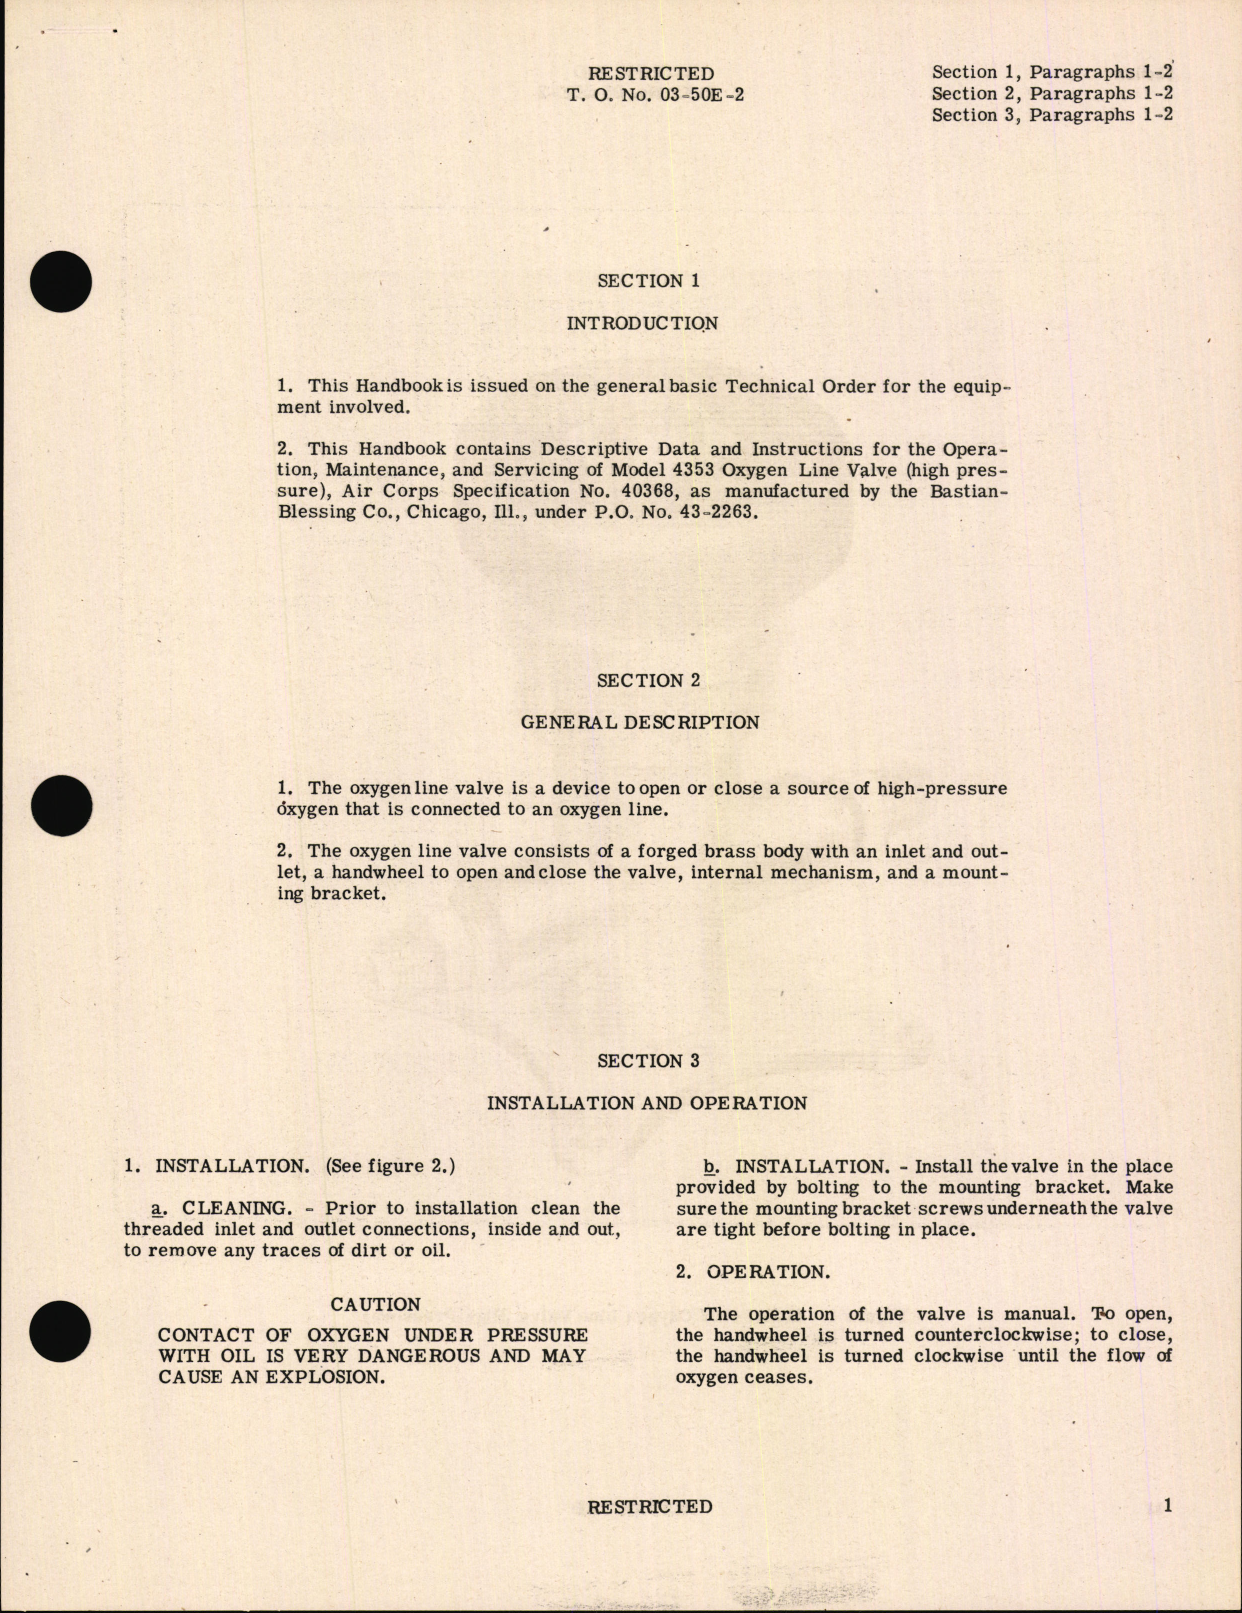 Sample page 5 from AirCorps Library document: Handbook of Instructions with Parts Catalog for Oxygen Line Valves Model 4353